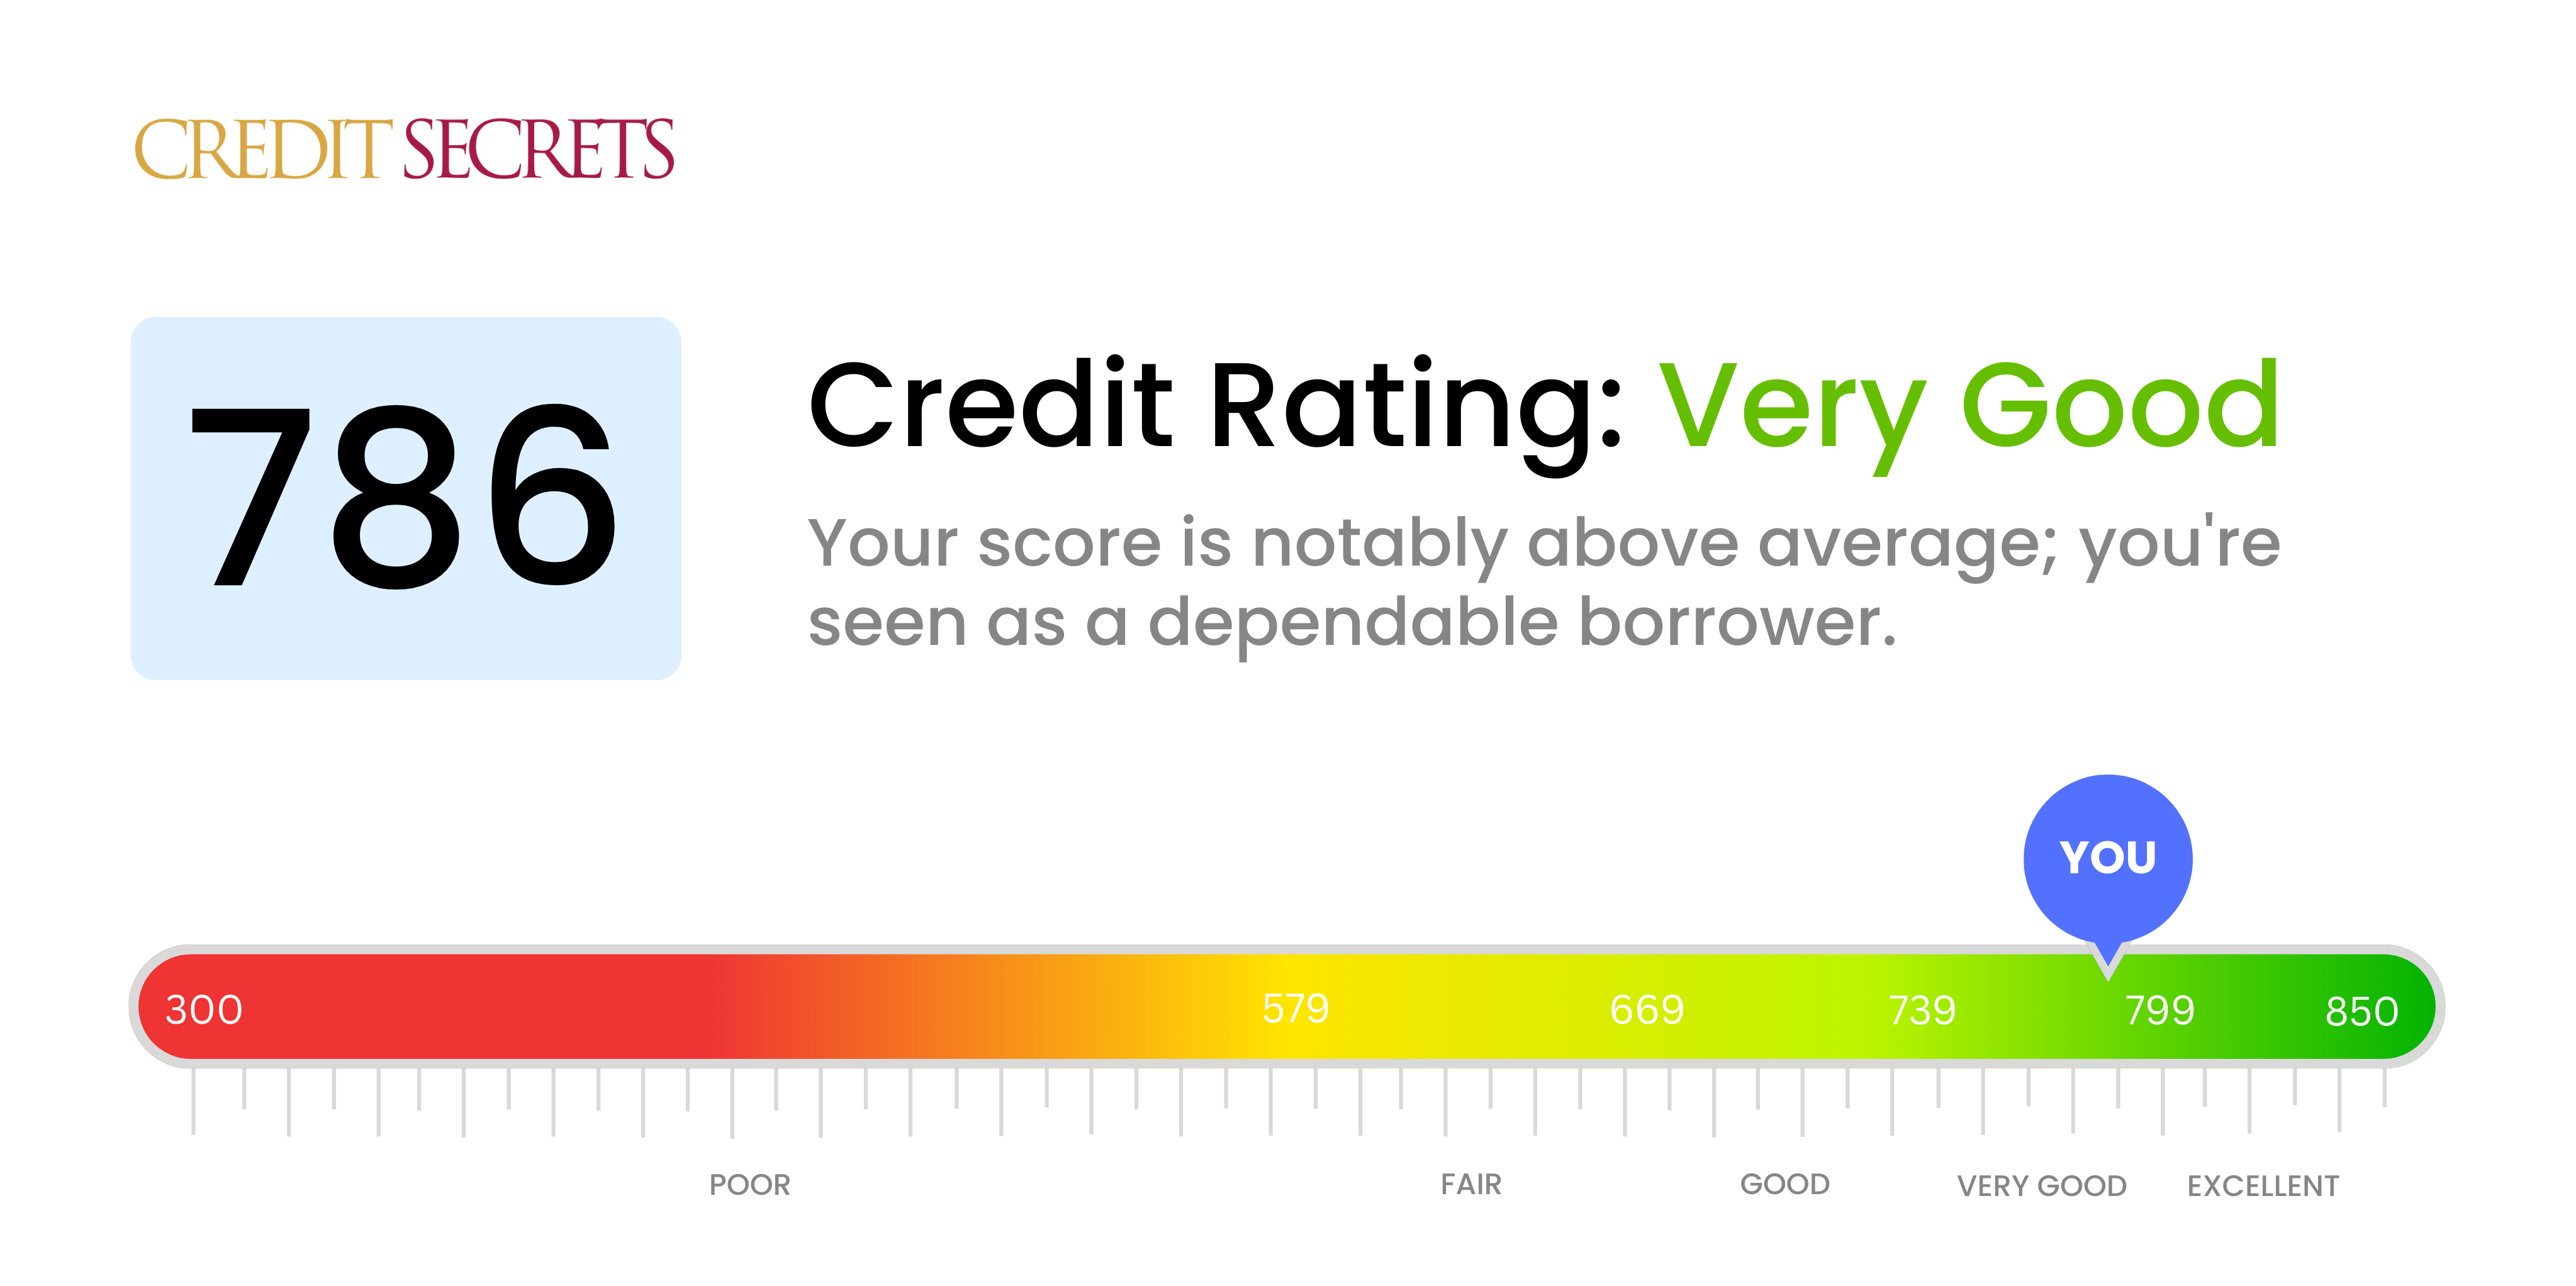 Is 786 a good credit score?